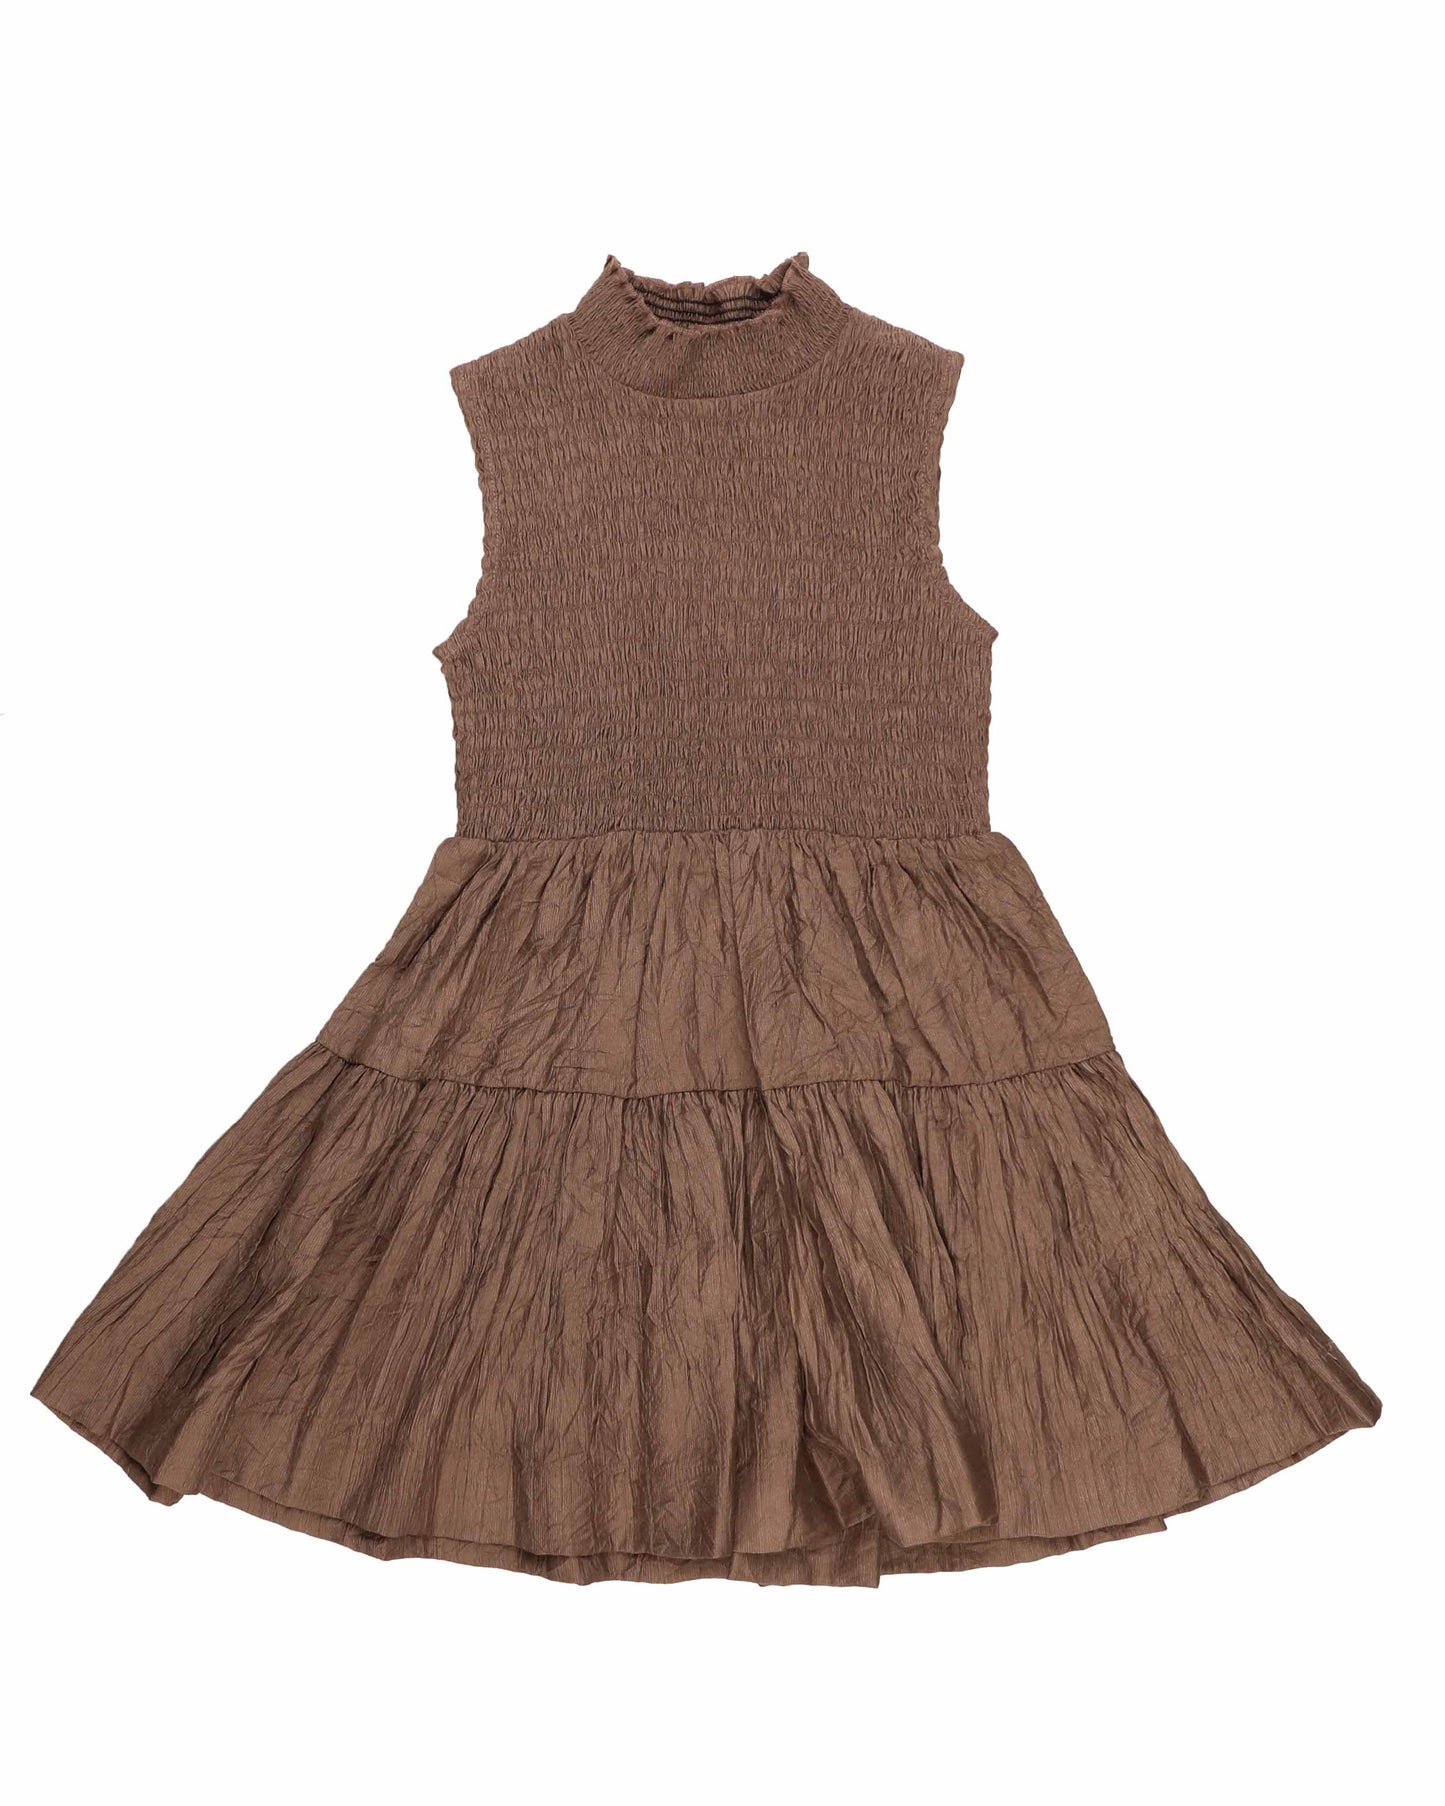 Noma Taupe Smocked Collared Dress [Final Sale]